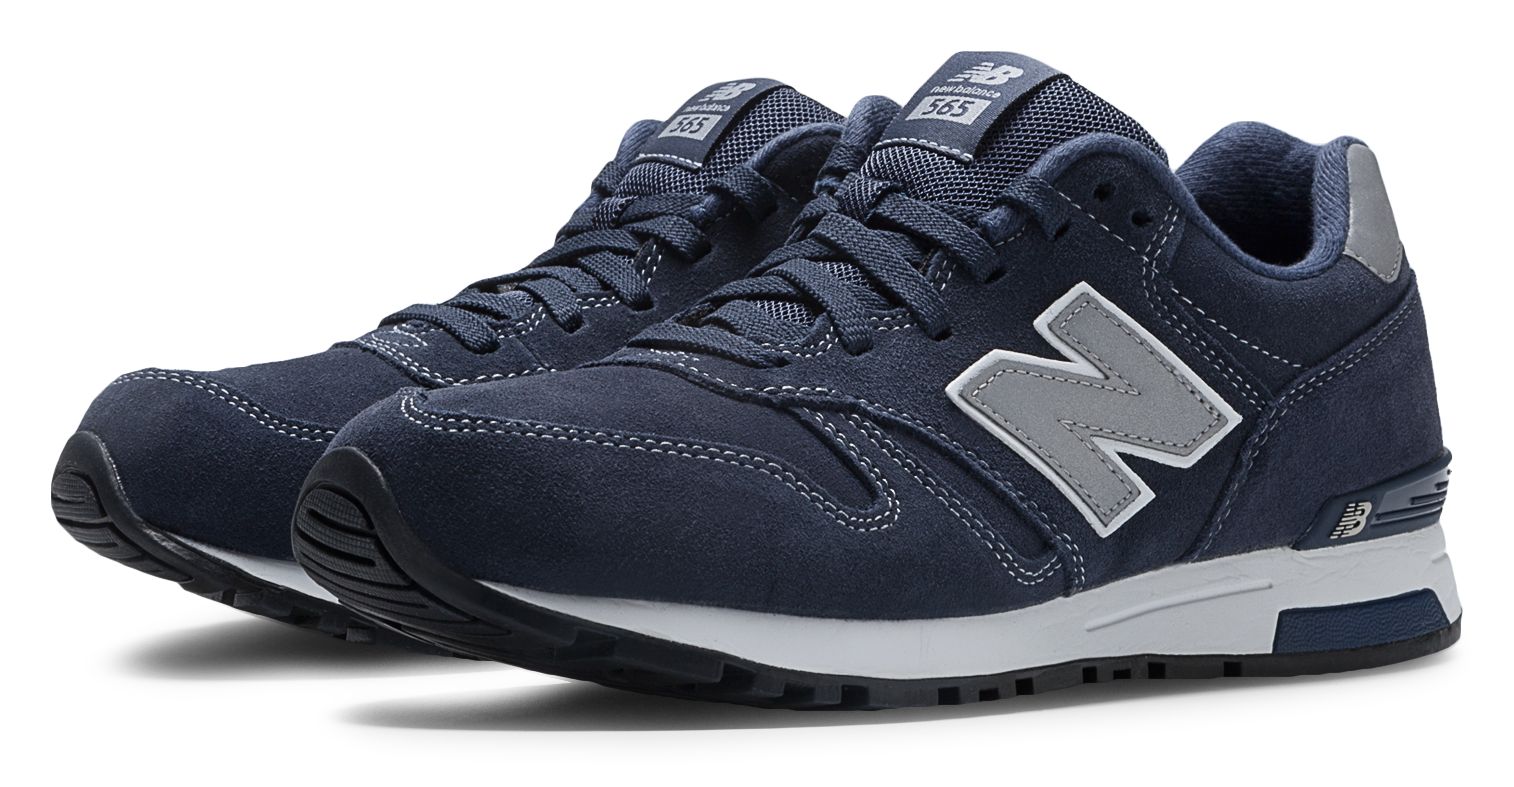 New Balance ML565-S on Sale - Discounts Up to 33% Off on ML565NV at Joe's New  Balance Outlet